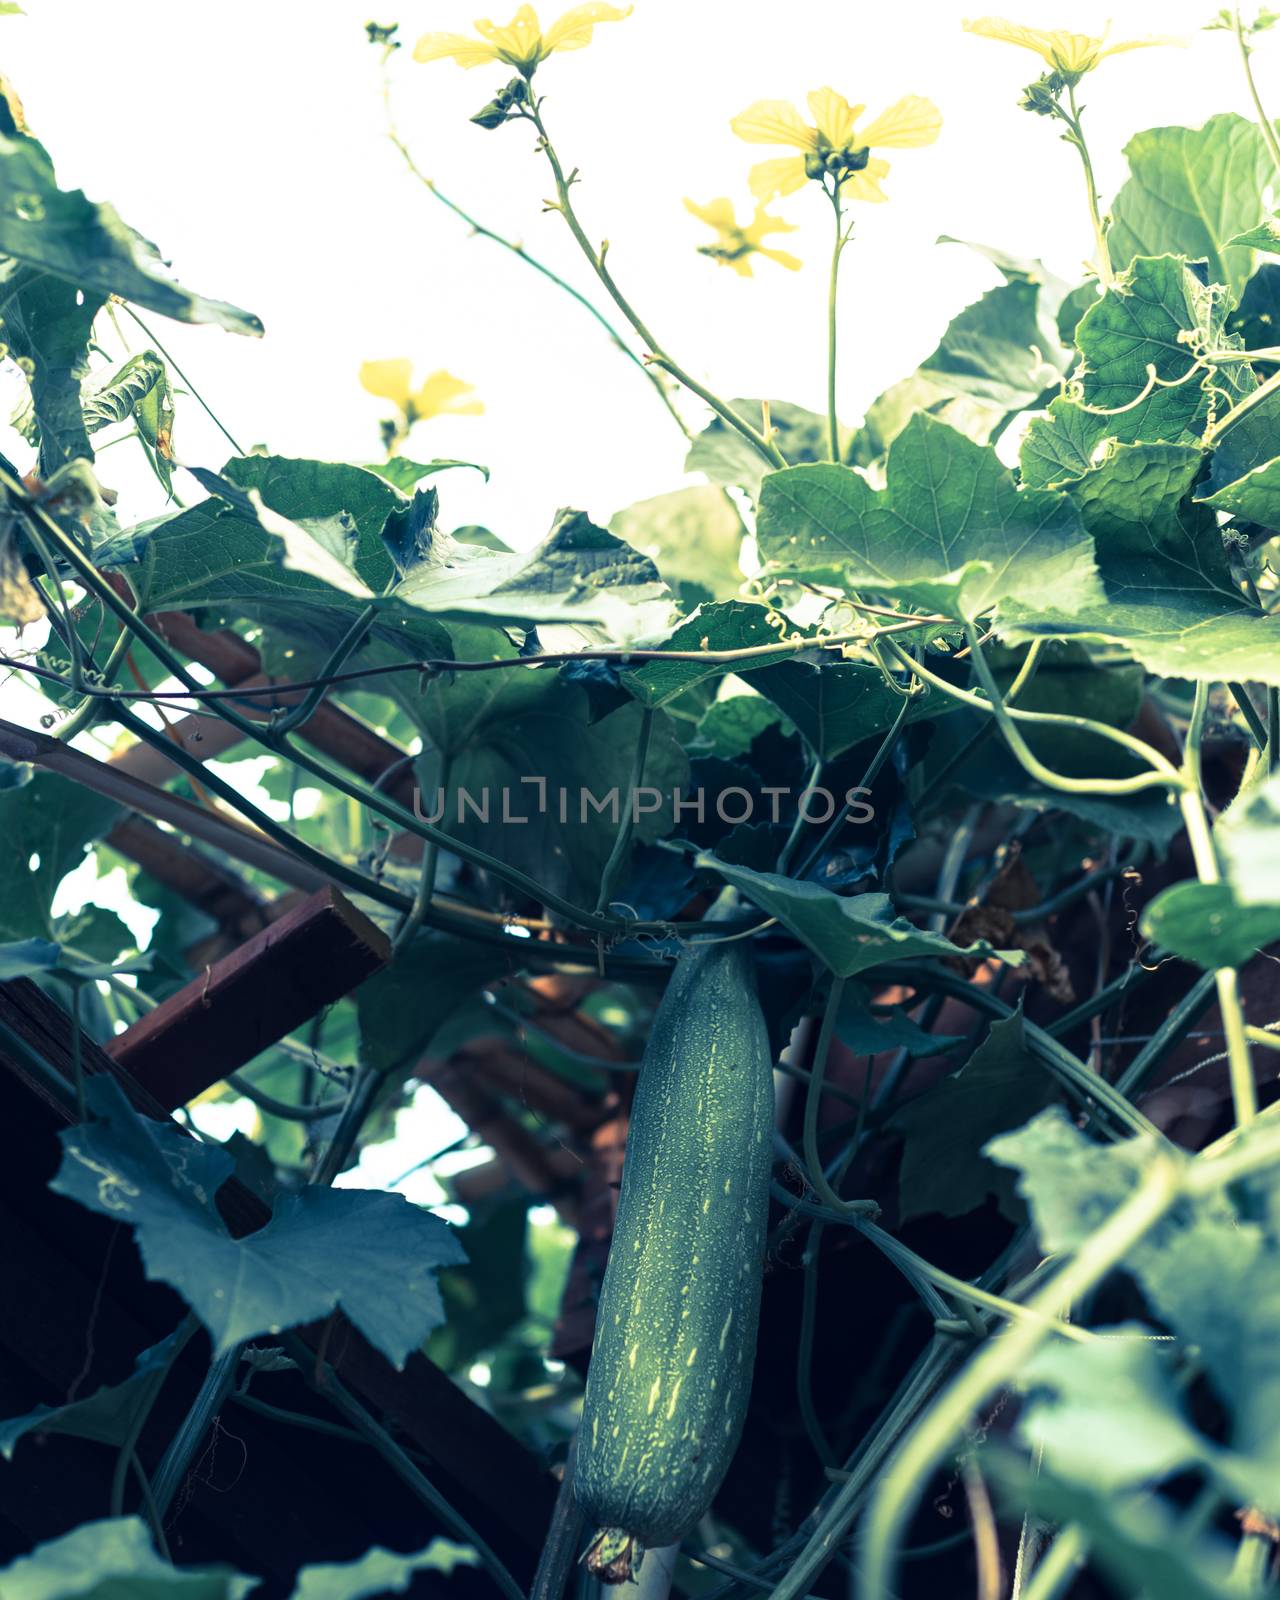 Toned photo lookup view of hanging Luffa Sponge gourd tropical fruit hanging on bamboo trellis and pergola. Yellow blooming flower with fruit at organic backyard garden near Dallas, Texas, USA